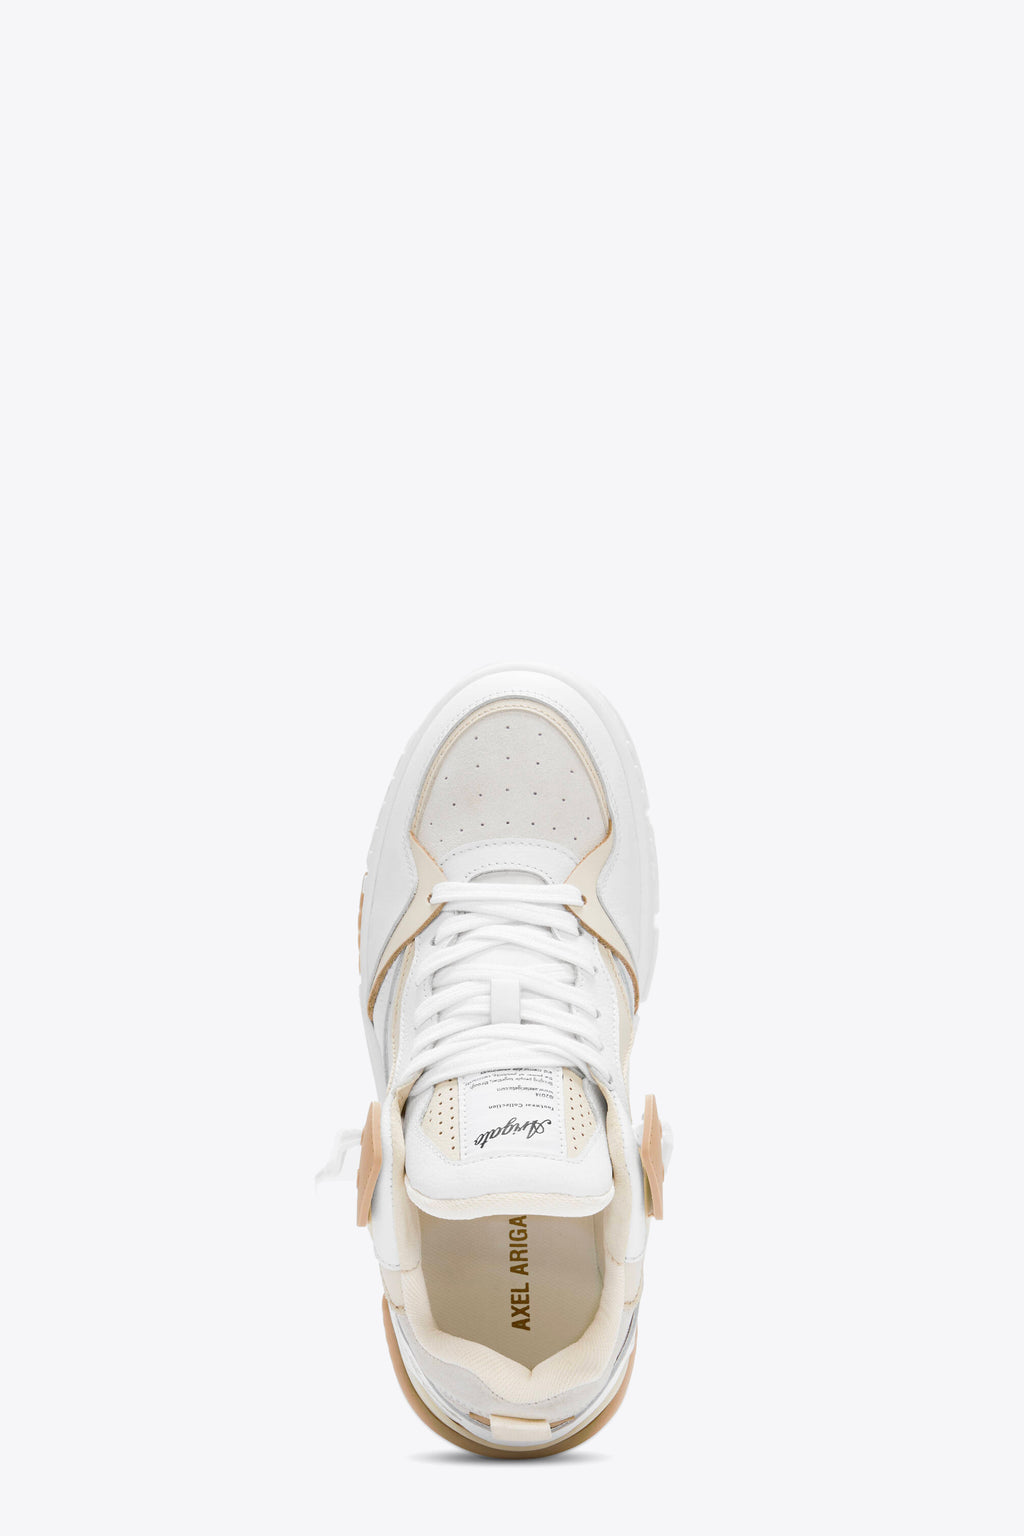 alt-image__White-and-beige-leather-90s-style-low-sneaker---Astro-Sneaker